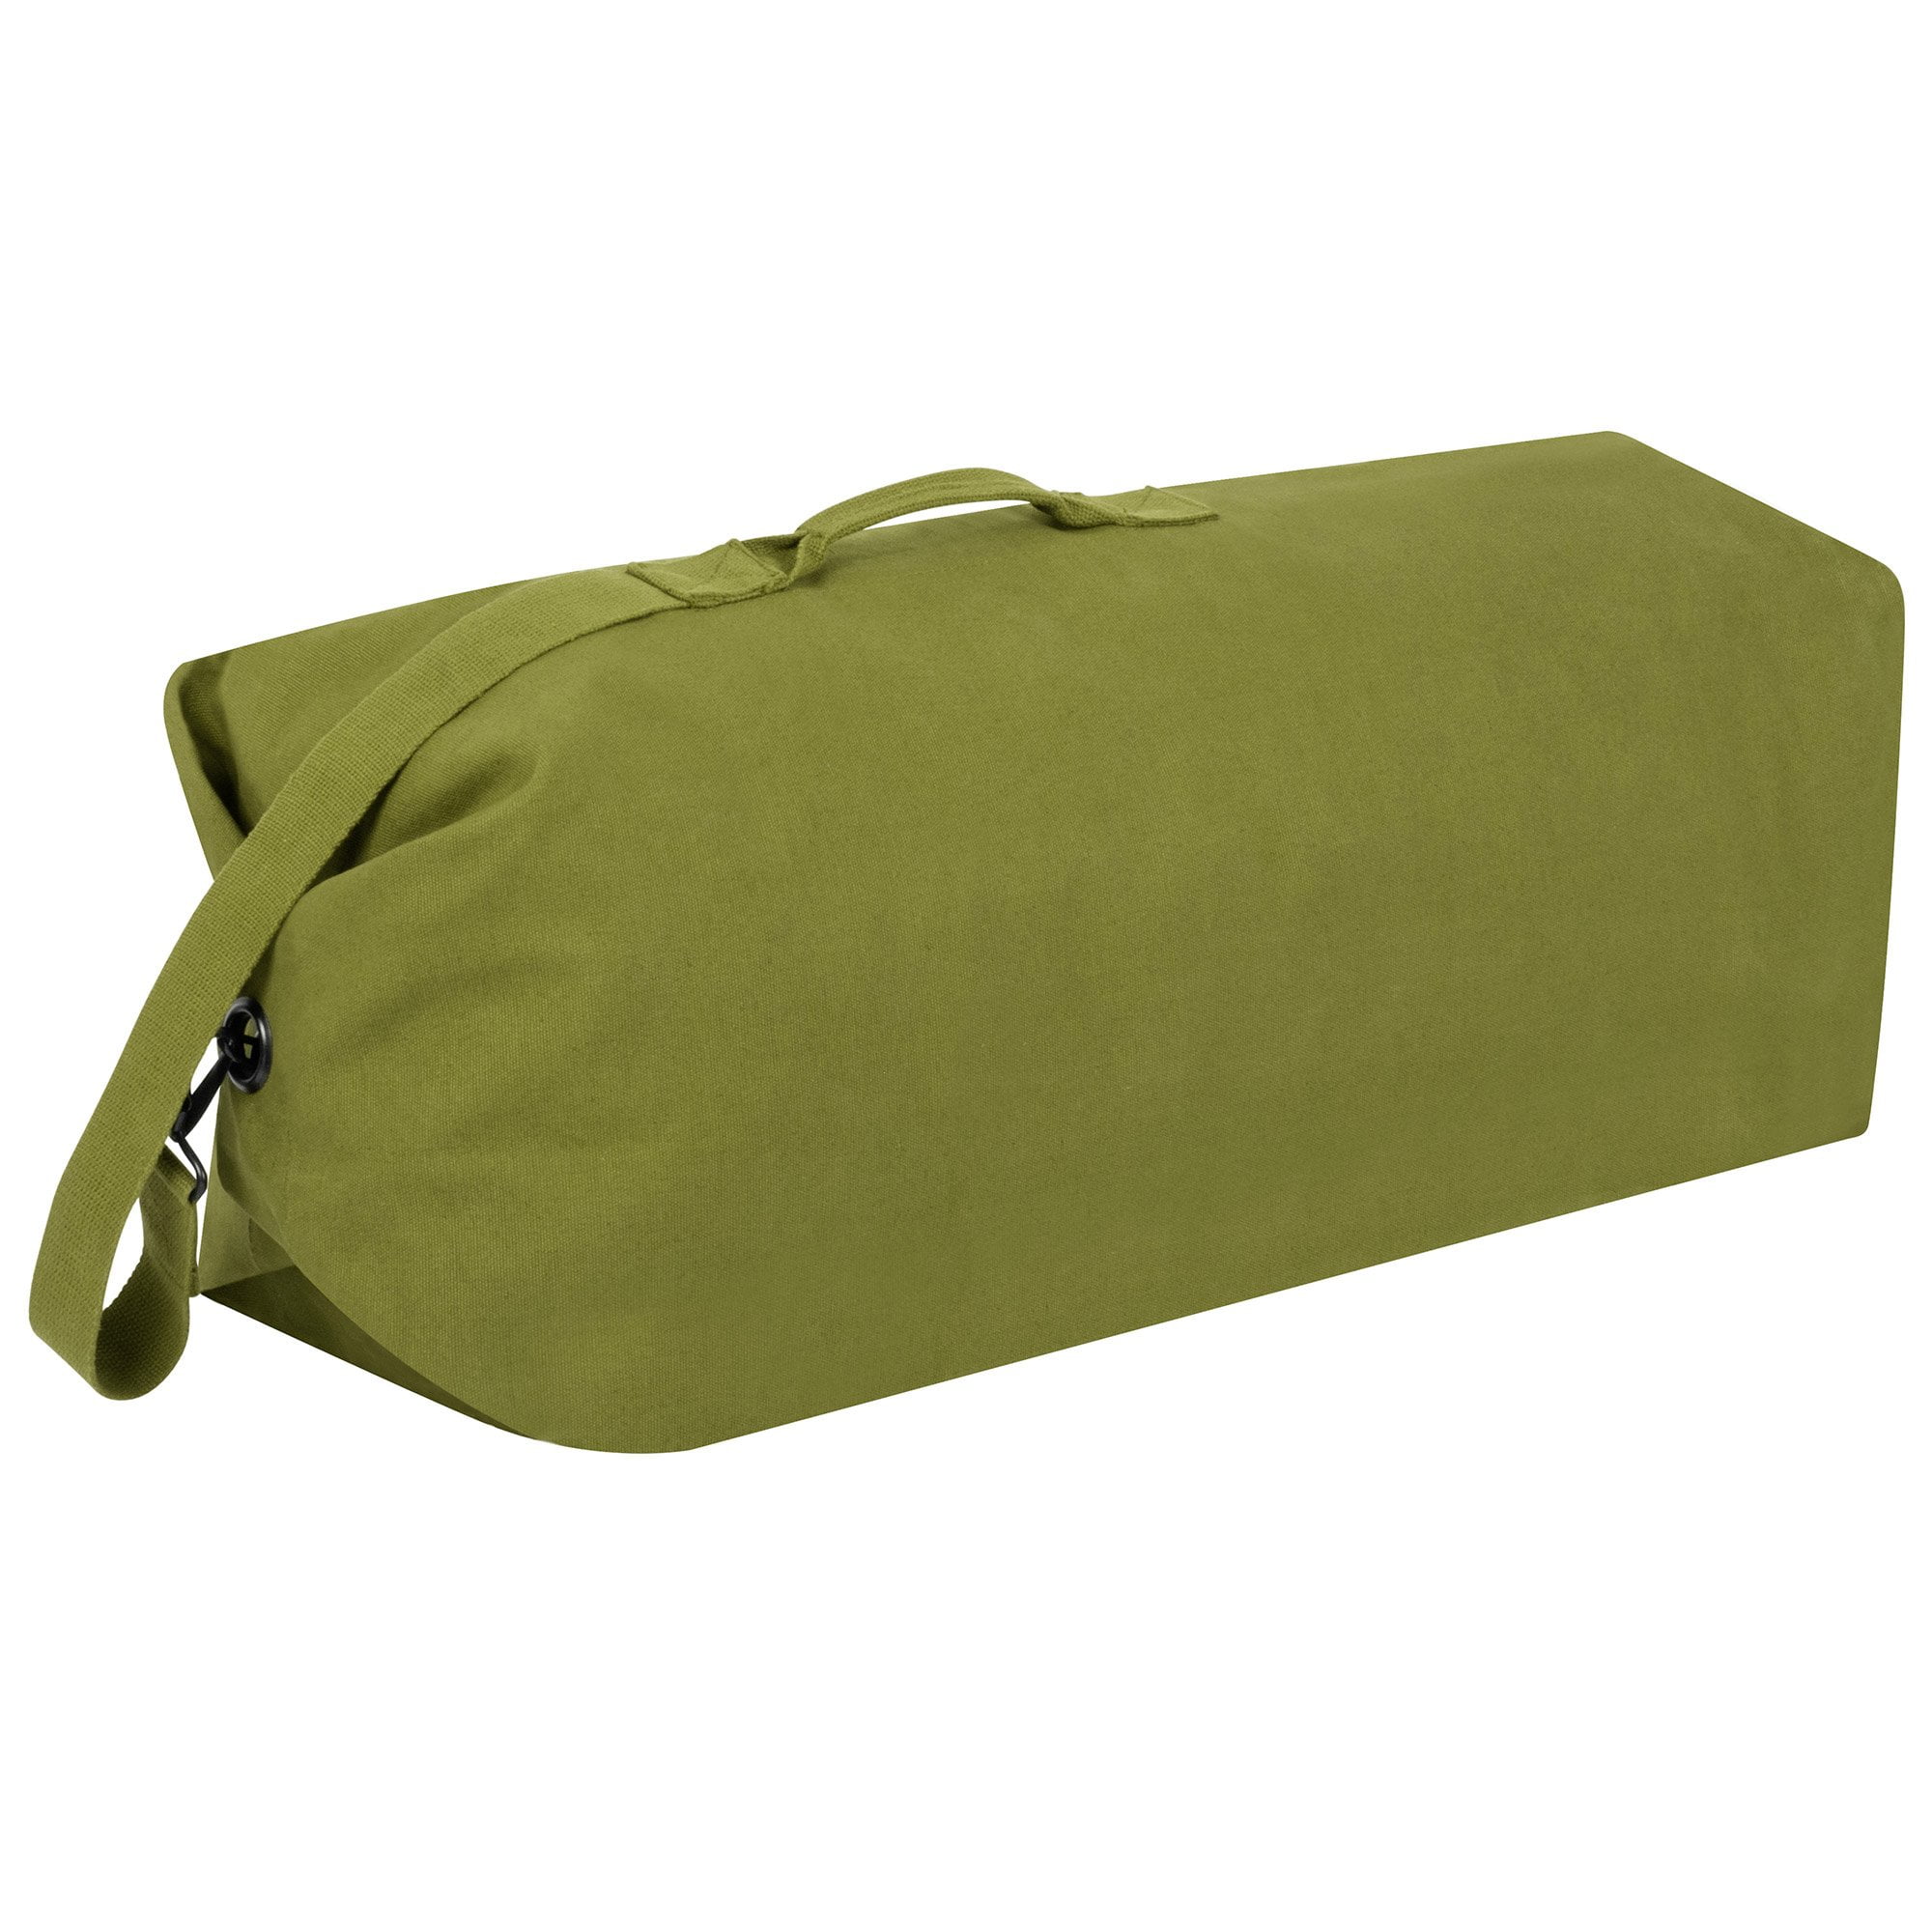 Farm Blue Top Load Single Strap Duffle Bag - Military GI Army Canvas Duffel  Bag - Camping, Travel and Gym Bags for Men - 30 x 50 Double Extra Large  Olive Drab 